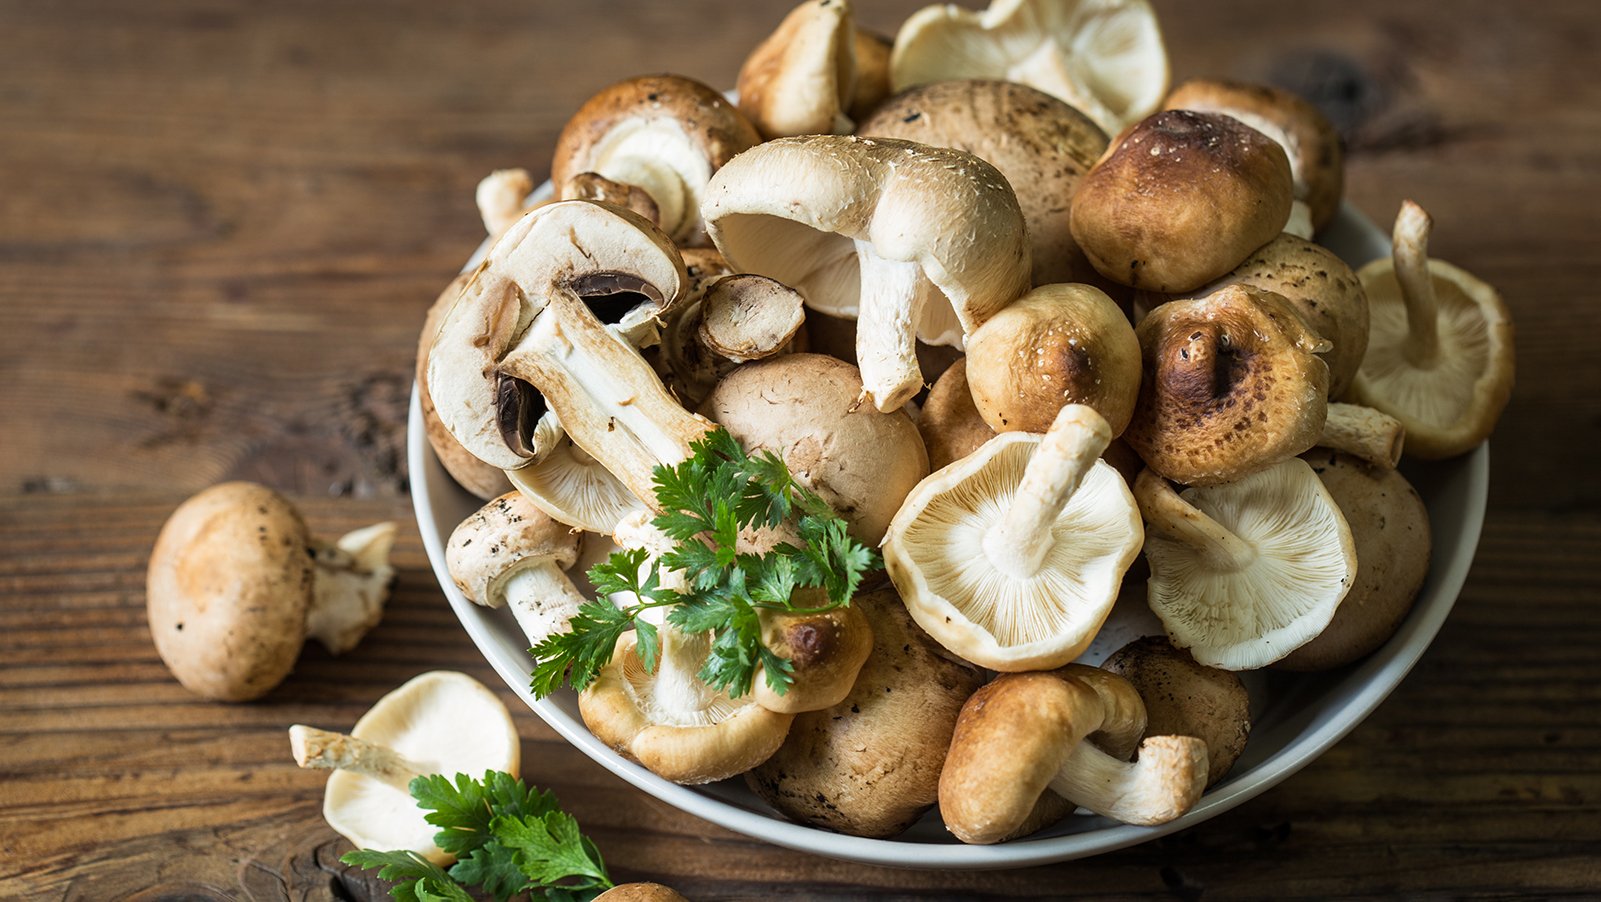 Mushrooms: Vitamin-D, Nutrition, And How To Cook Them